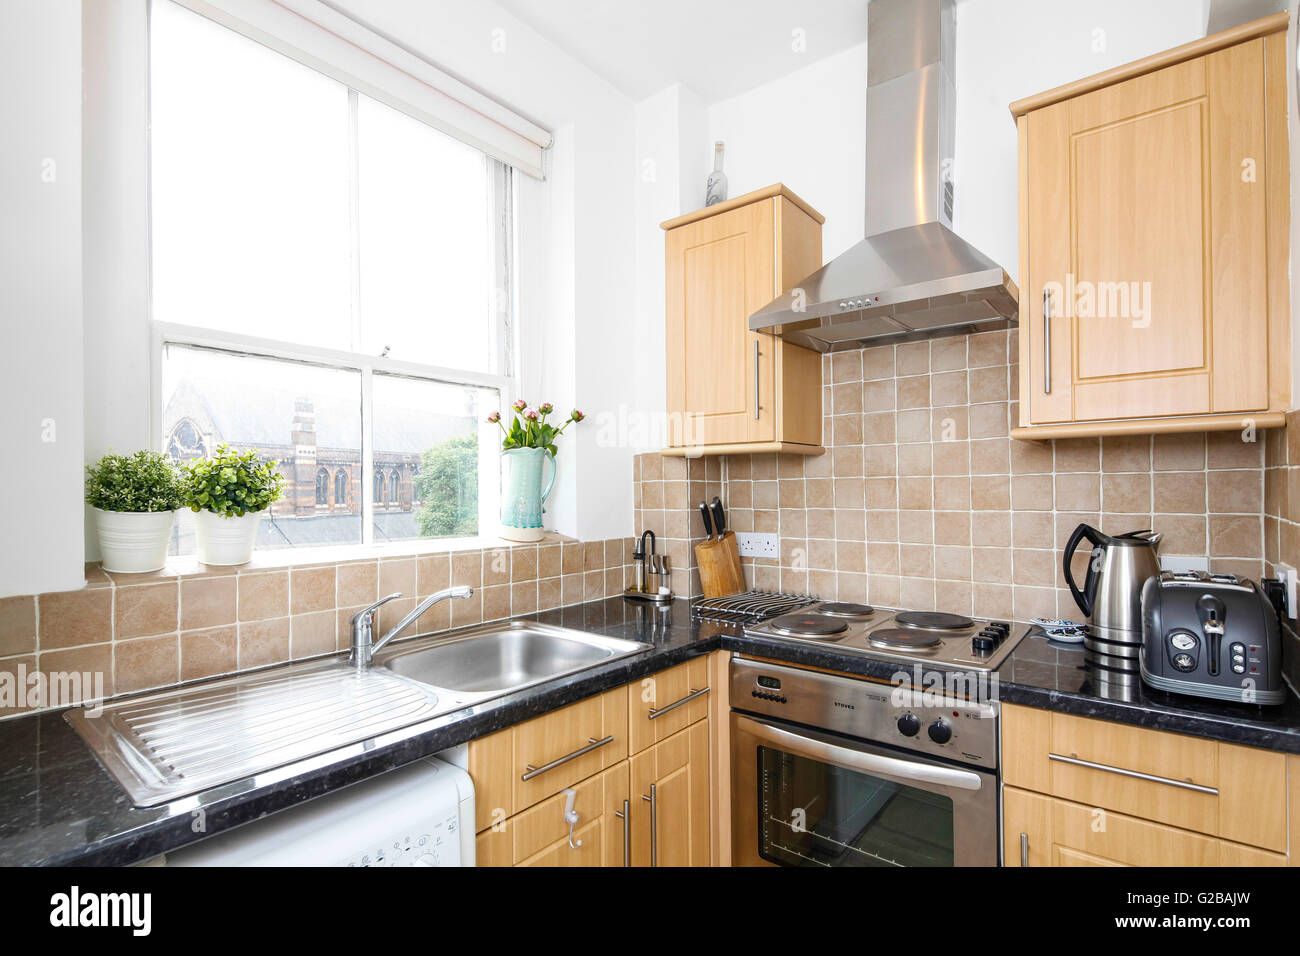 Park House, Harrington Road. Modern kitchen with fresh wood cabinets and black countertops. Large window over sink. Stock Photo